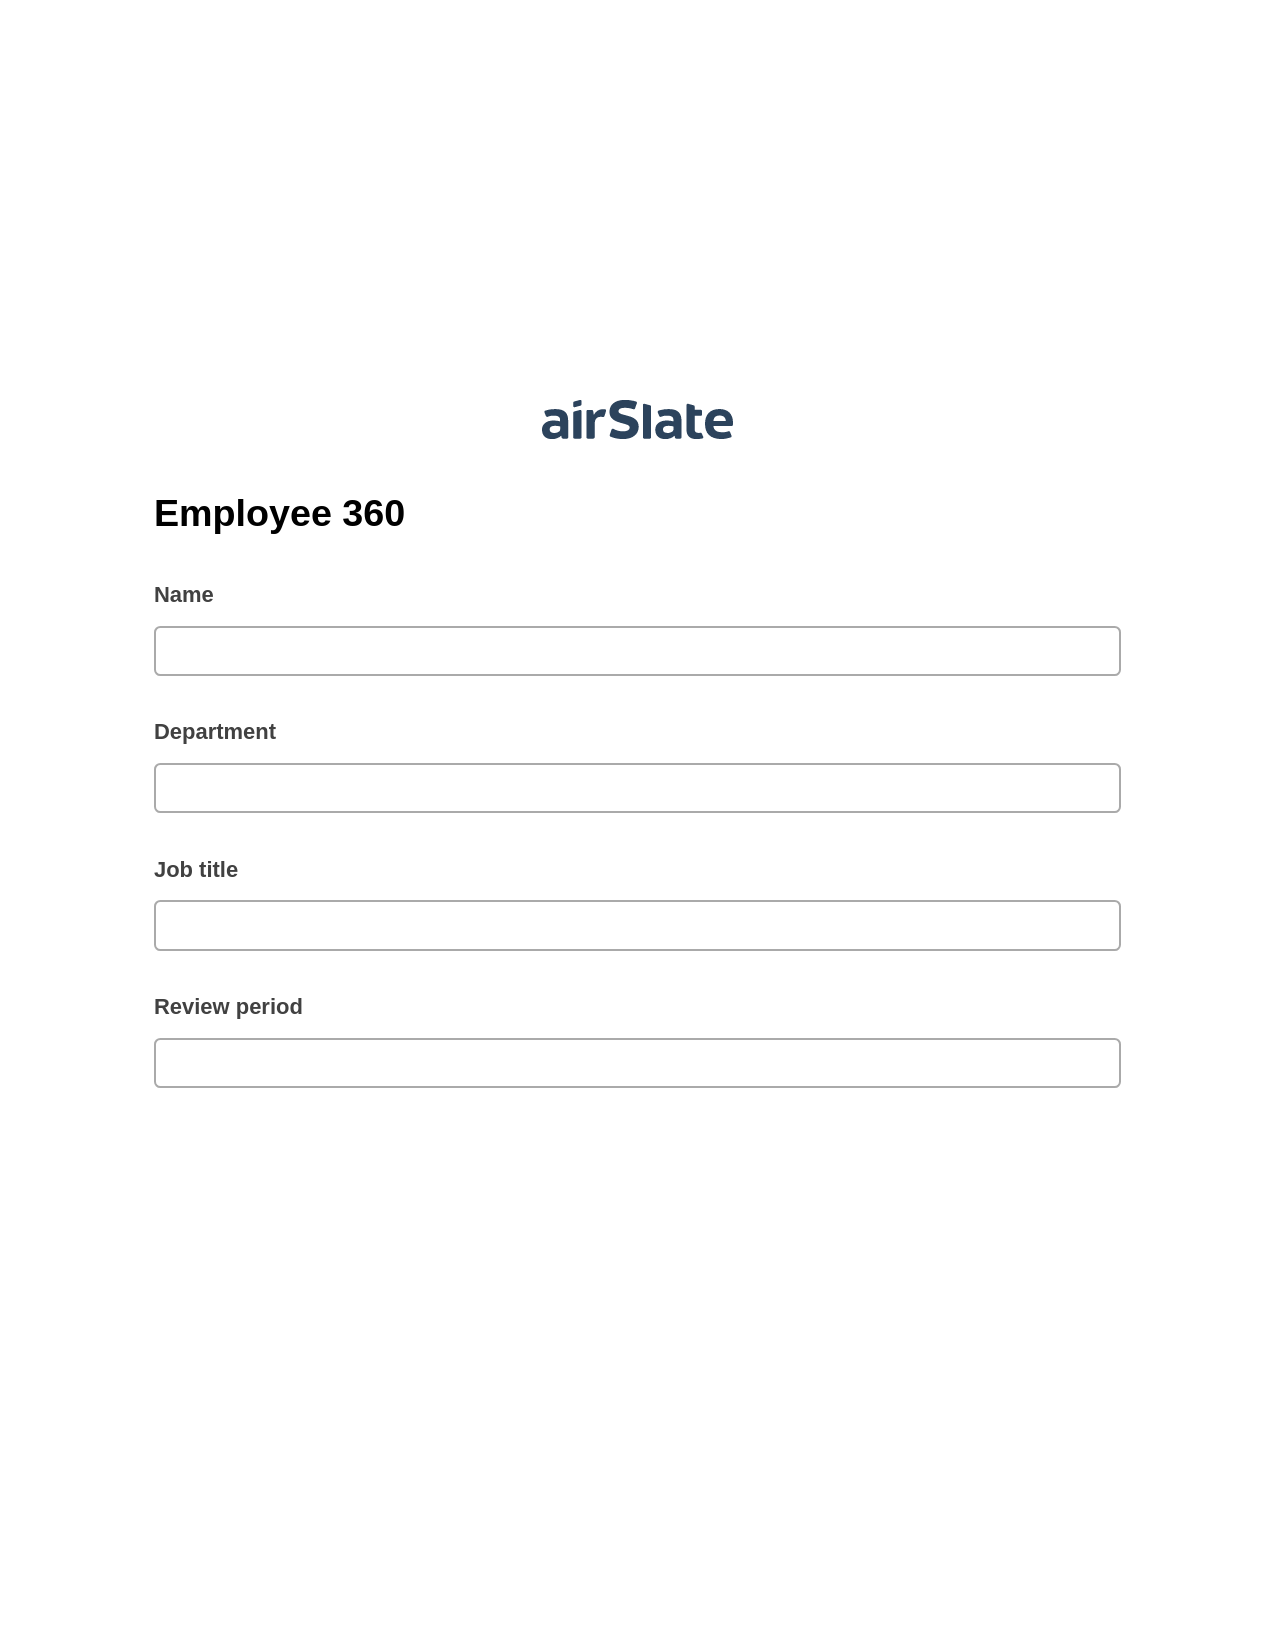 Employee 360 Pre-fill from CSV File Bot, Unassign Role Bot, Slack Notification Postfinish Bot